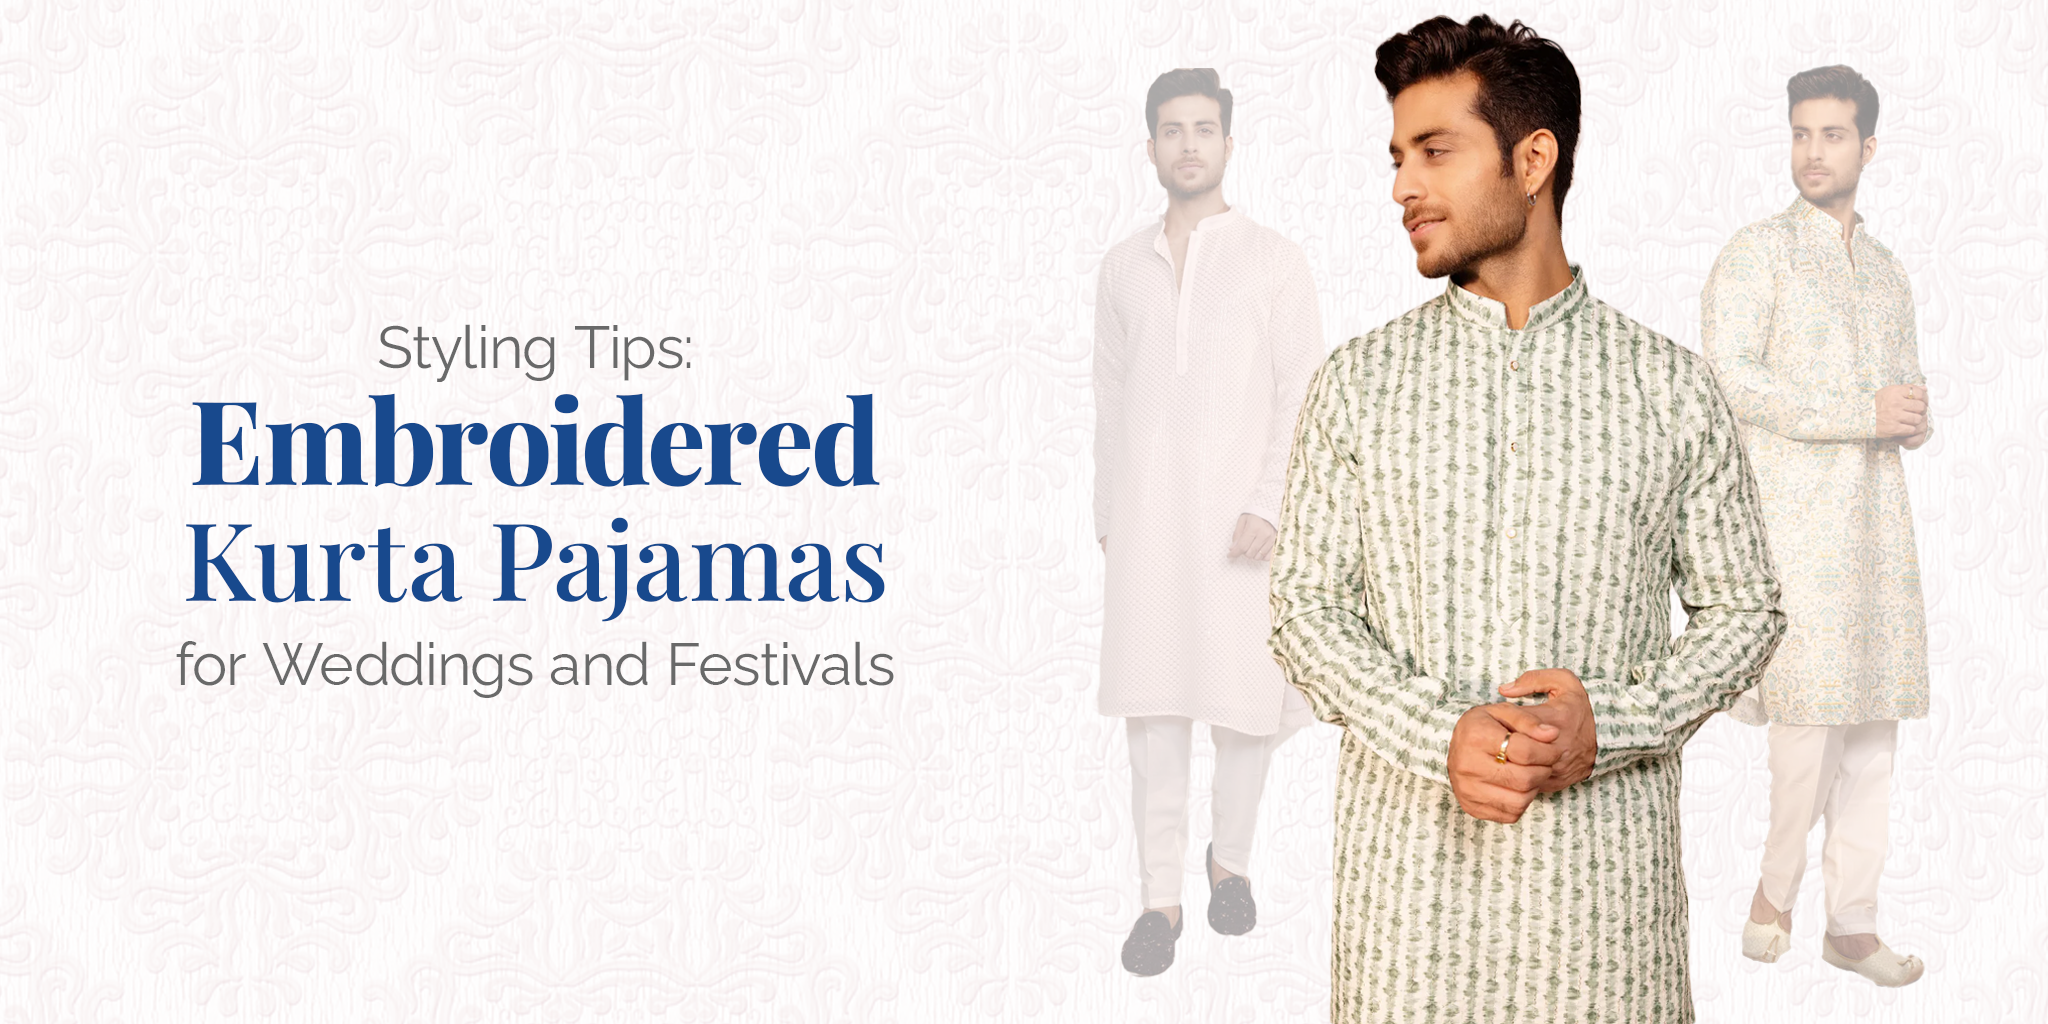 Styling Tips: Embroidered Kurta Pajamas for Weddings and Festivals